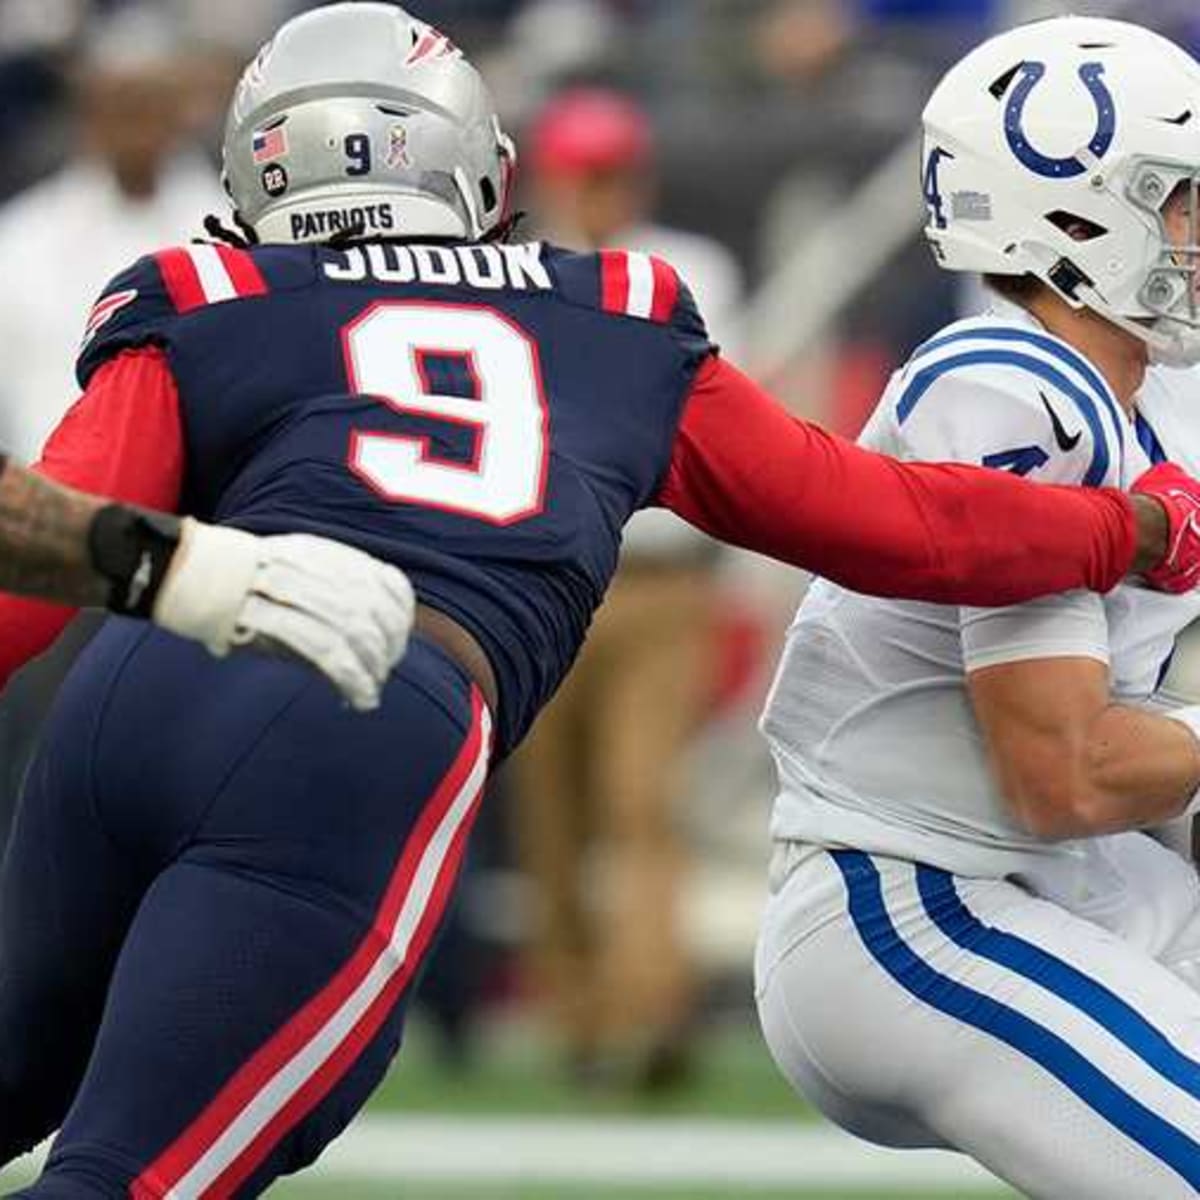 Indianapolis Colts uniforms: Twitter reacts to new alternate jerseys